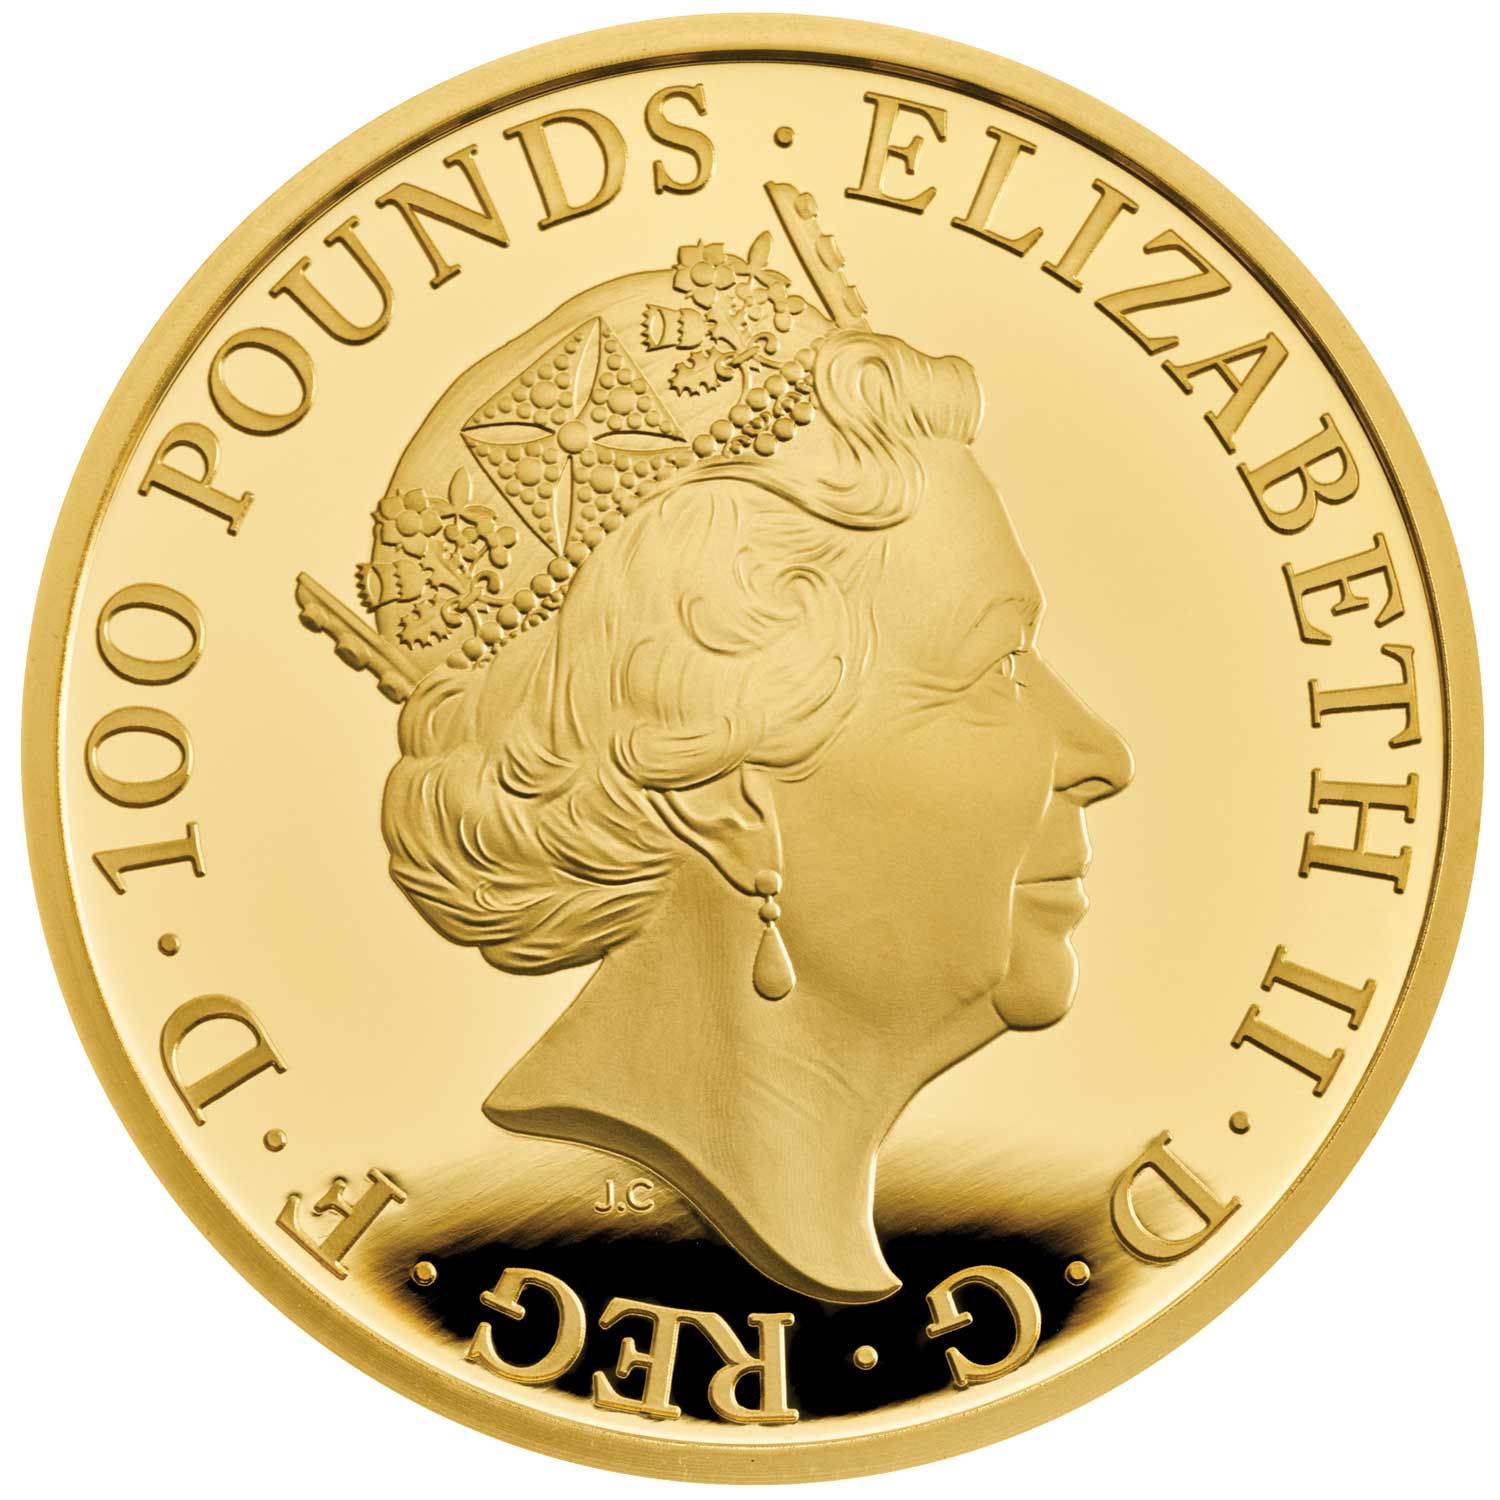 Falcon of the Plantagenets 2019 One-Ounce Gold Coin | The Royal Mint